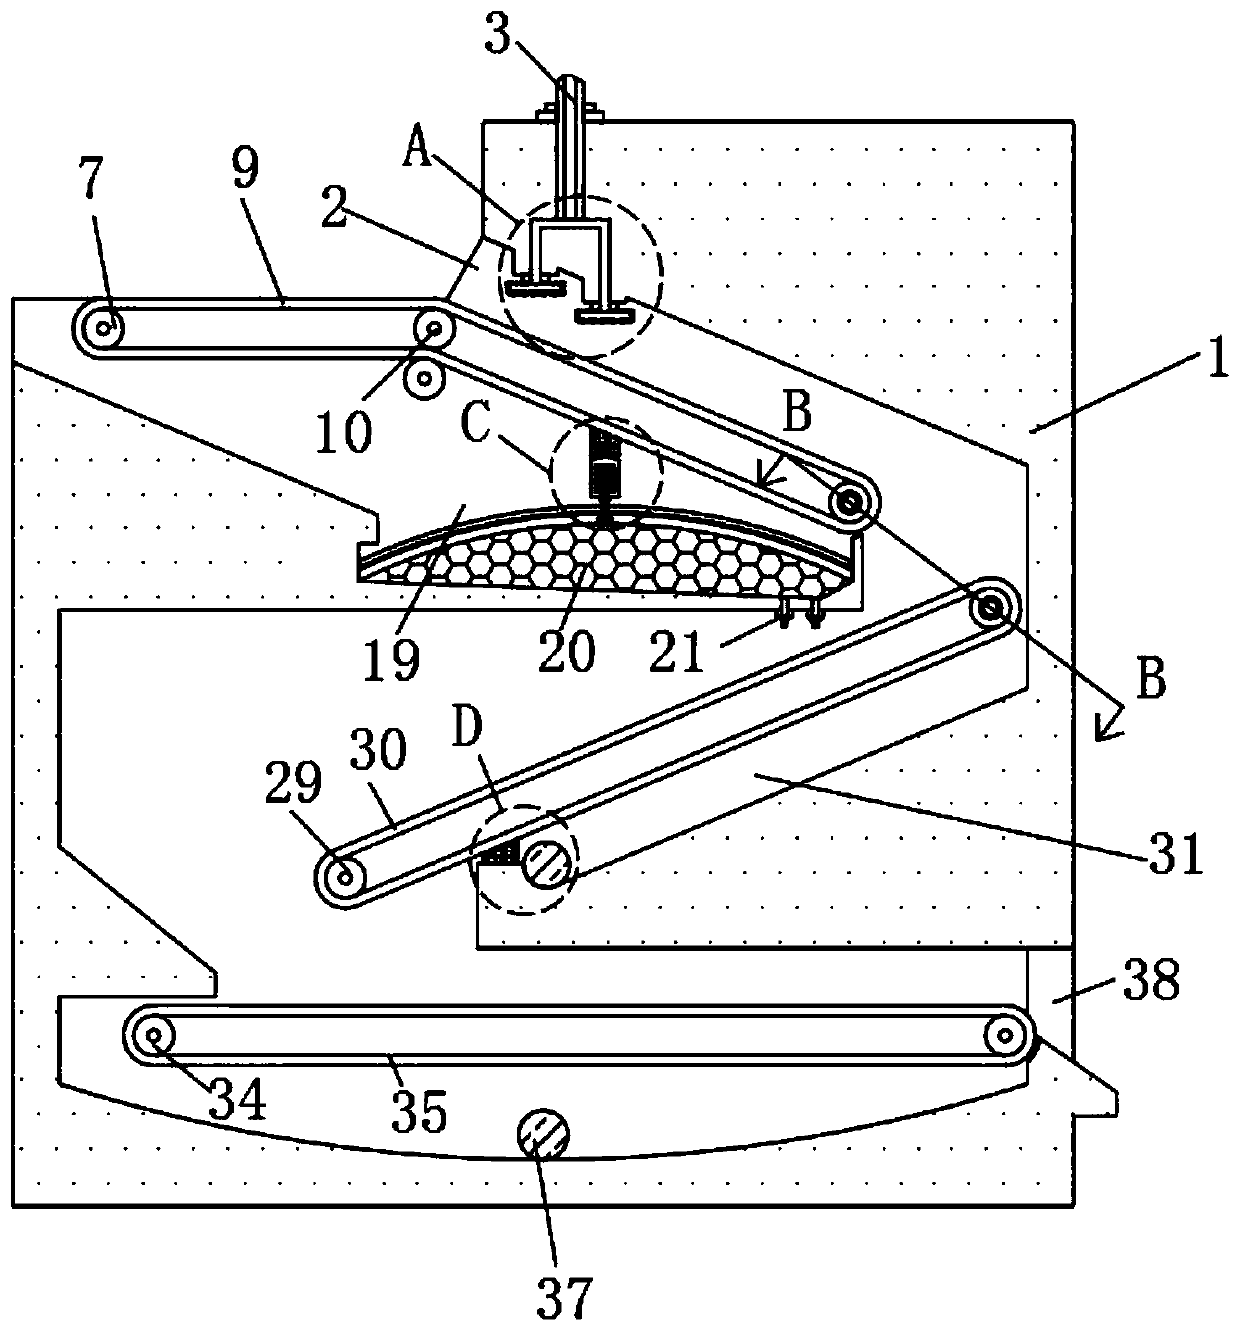 Automatic turnover-type device for uniformly smearing sauce for batch processing of cooked meat